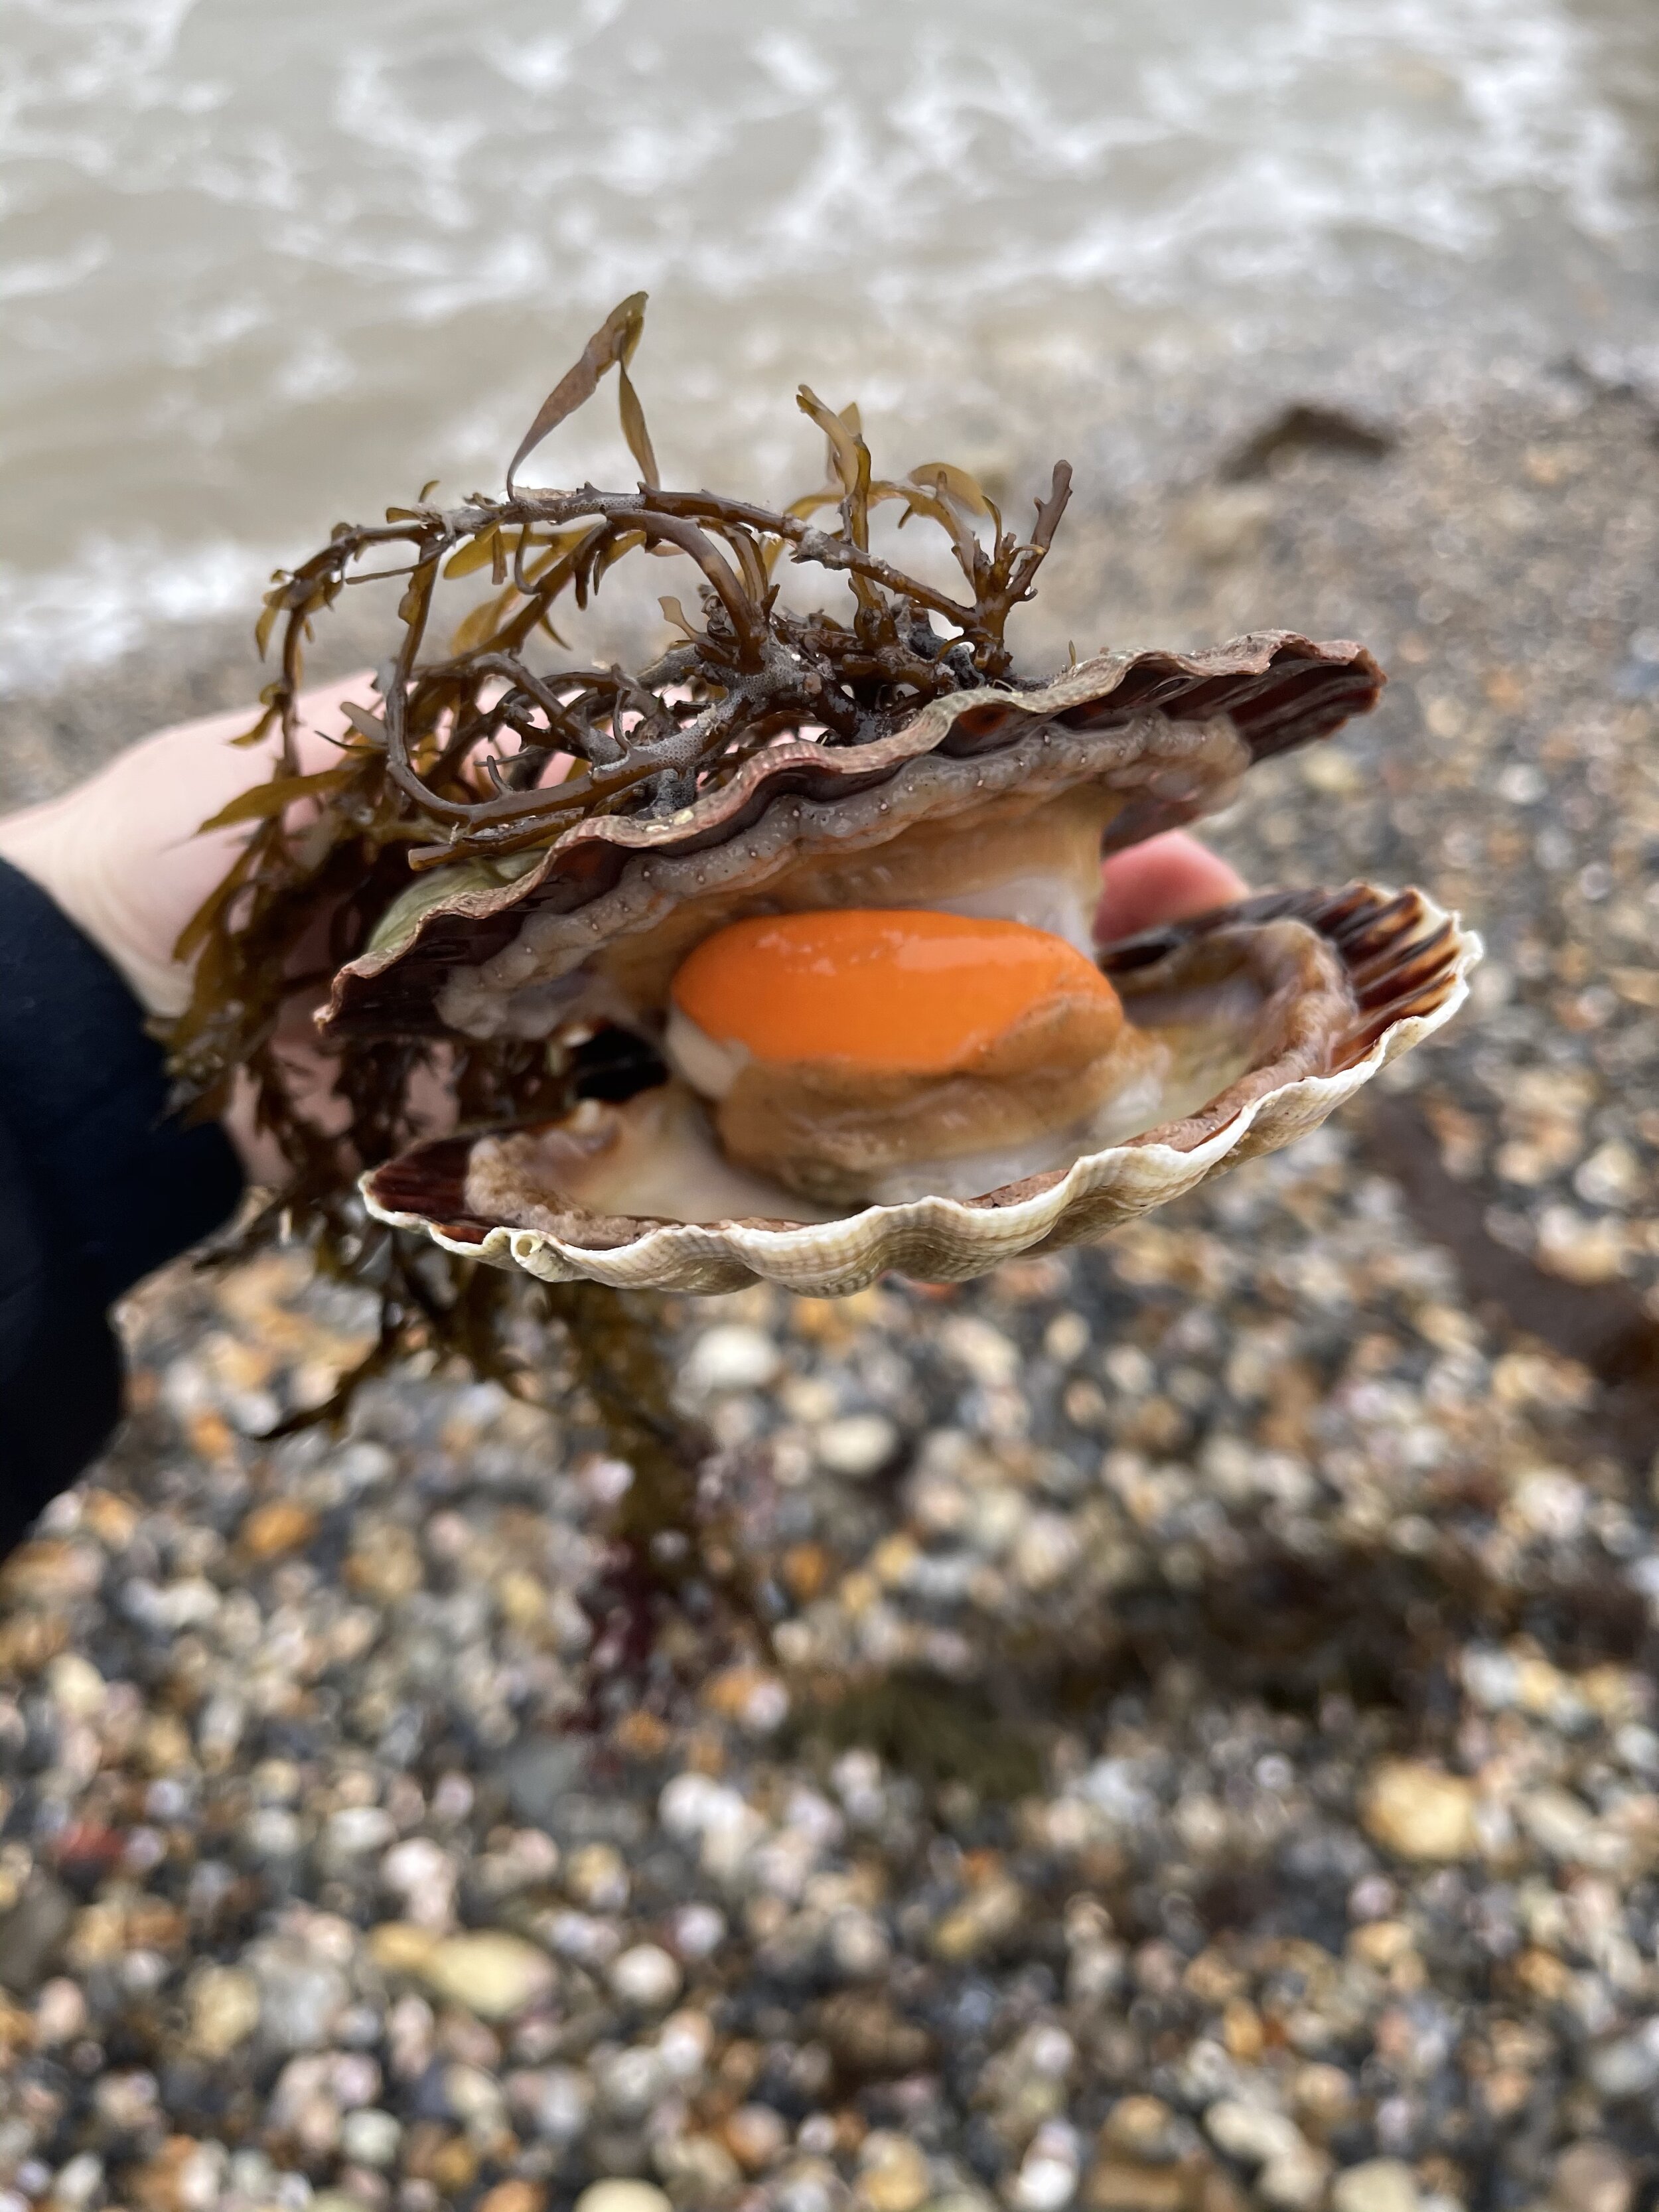 Katy foraging for scallops on the Isle of Wight